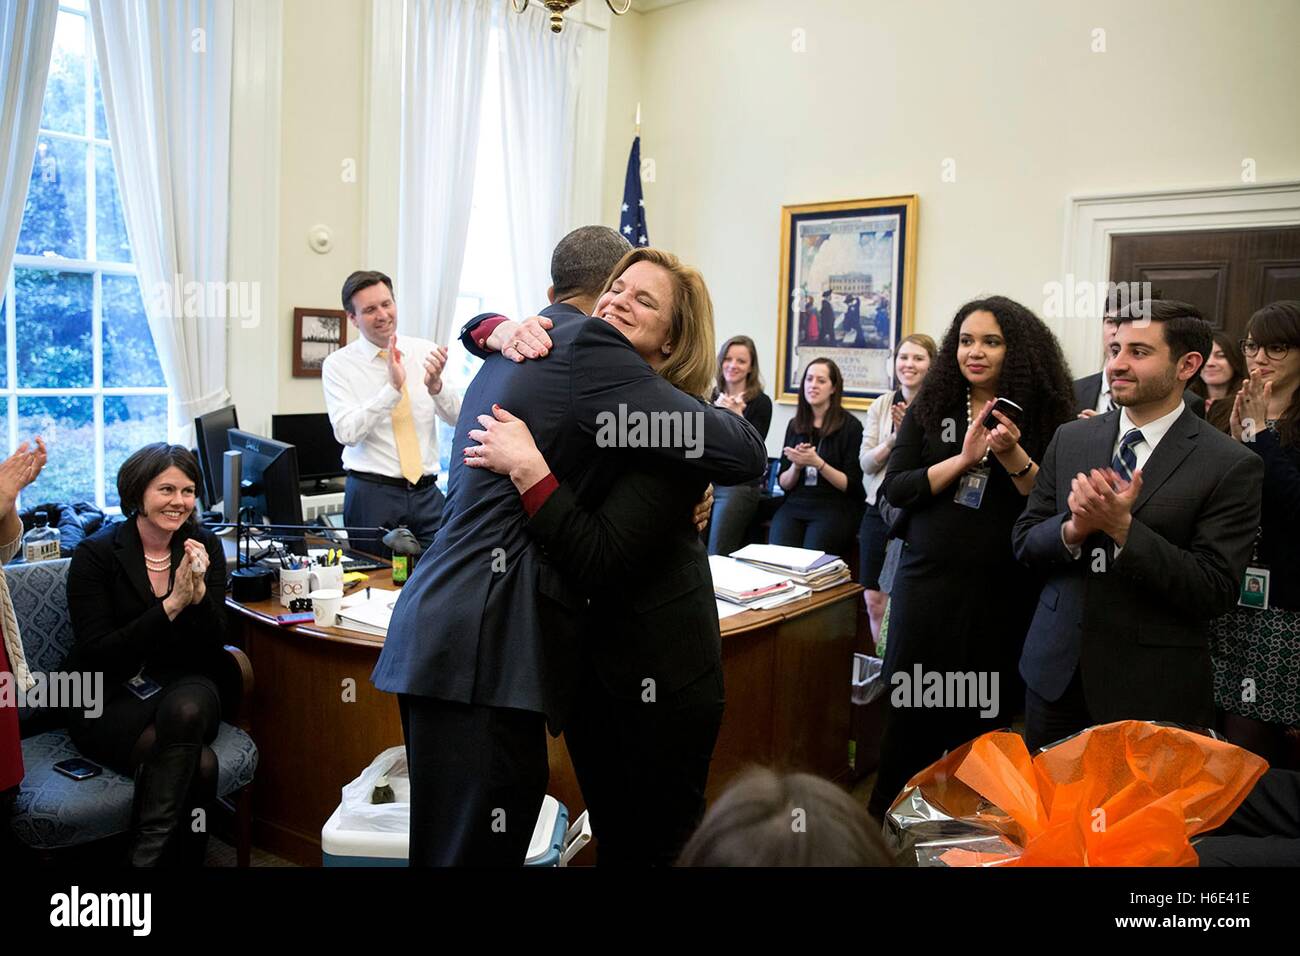 U.S. President Barack Obama hugs White House Communications Director Jennifer Palmieri during her farewell party in a West Wing office March 20, 2015 in Washington, DC. Stock Photo